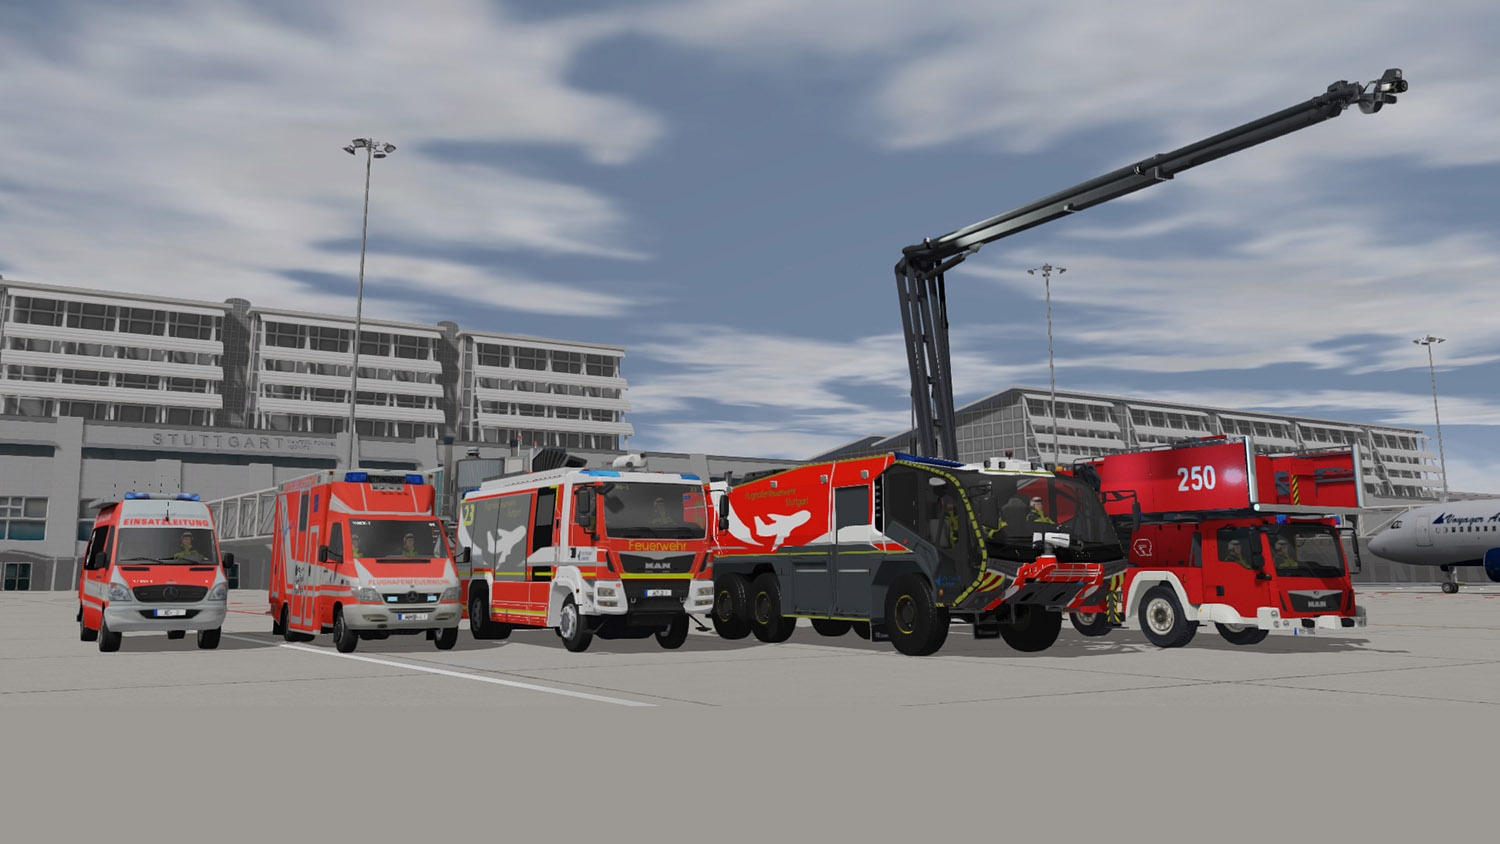 The fleet of Stuttgart Airport Vehicles that are used in ADMS to train familiarization, driving procedures, and ARFF response.